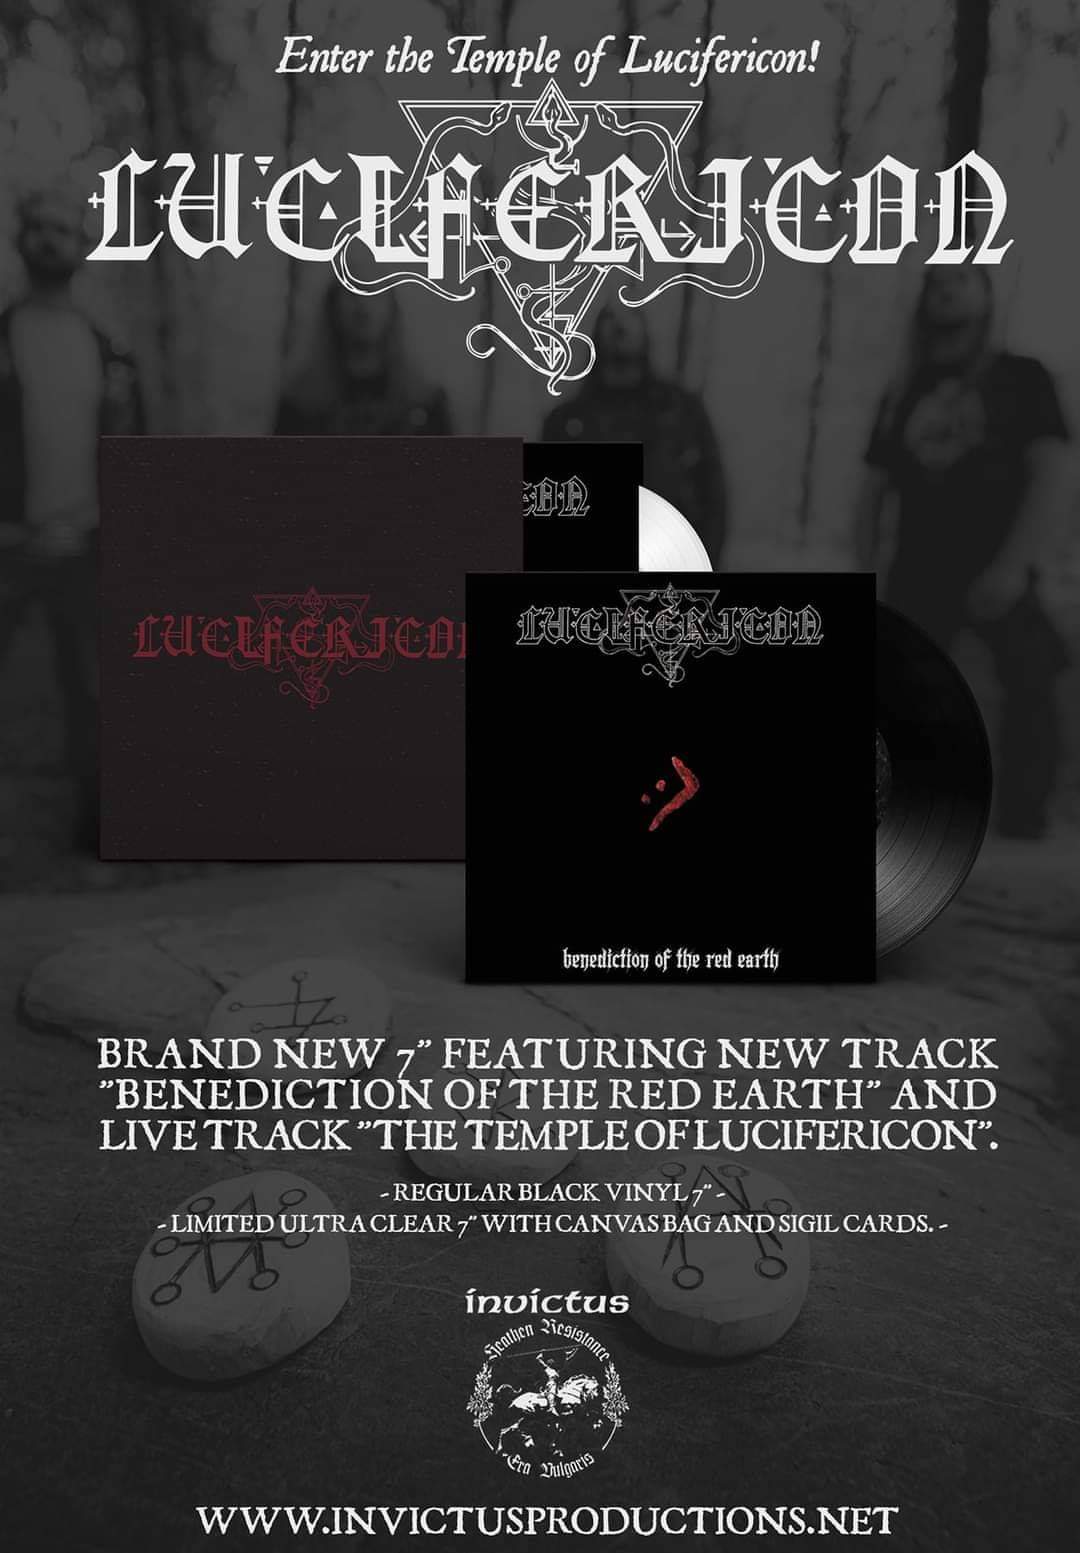 Lucifericon 'Benediction of the Red Earth' 7" out October 30th.